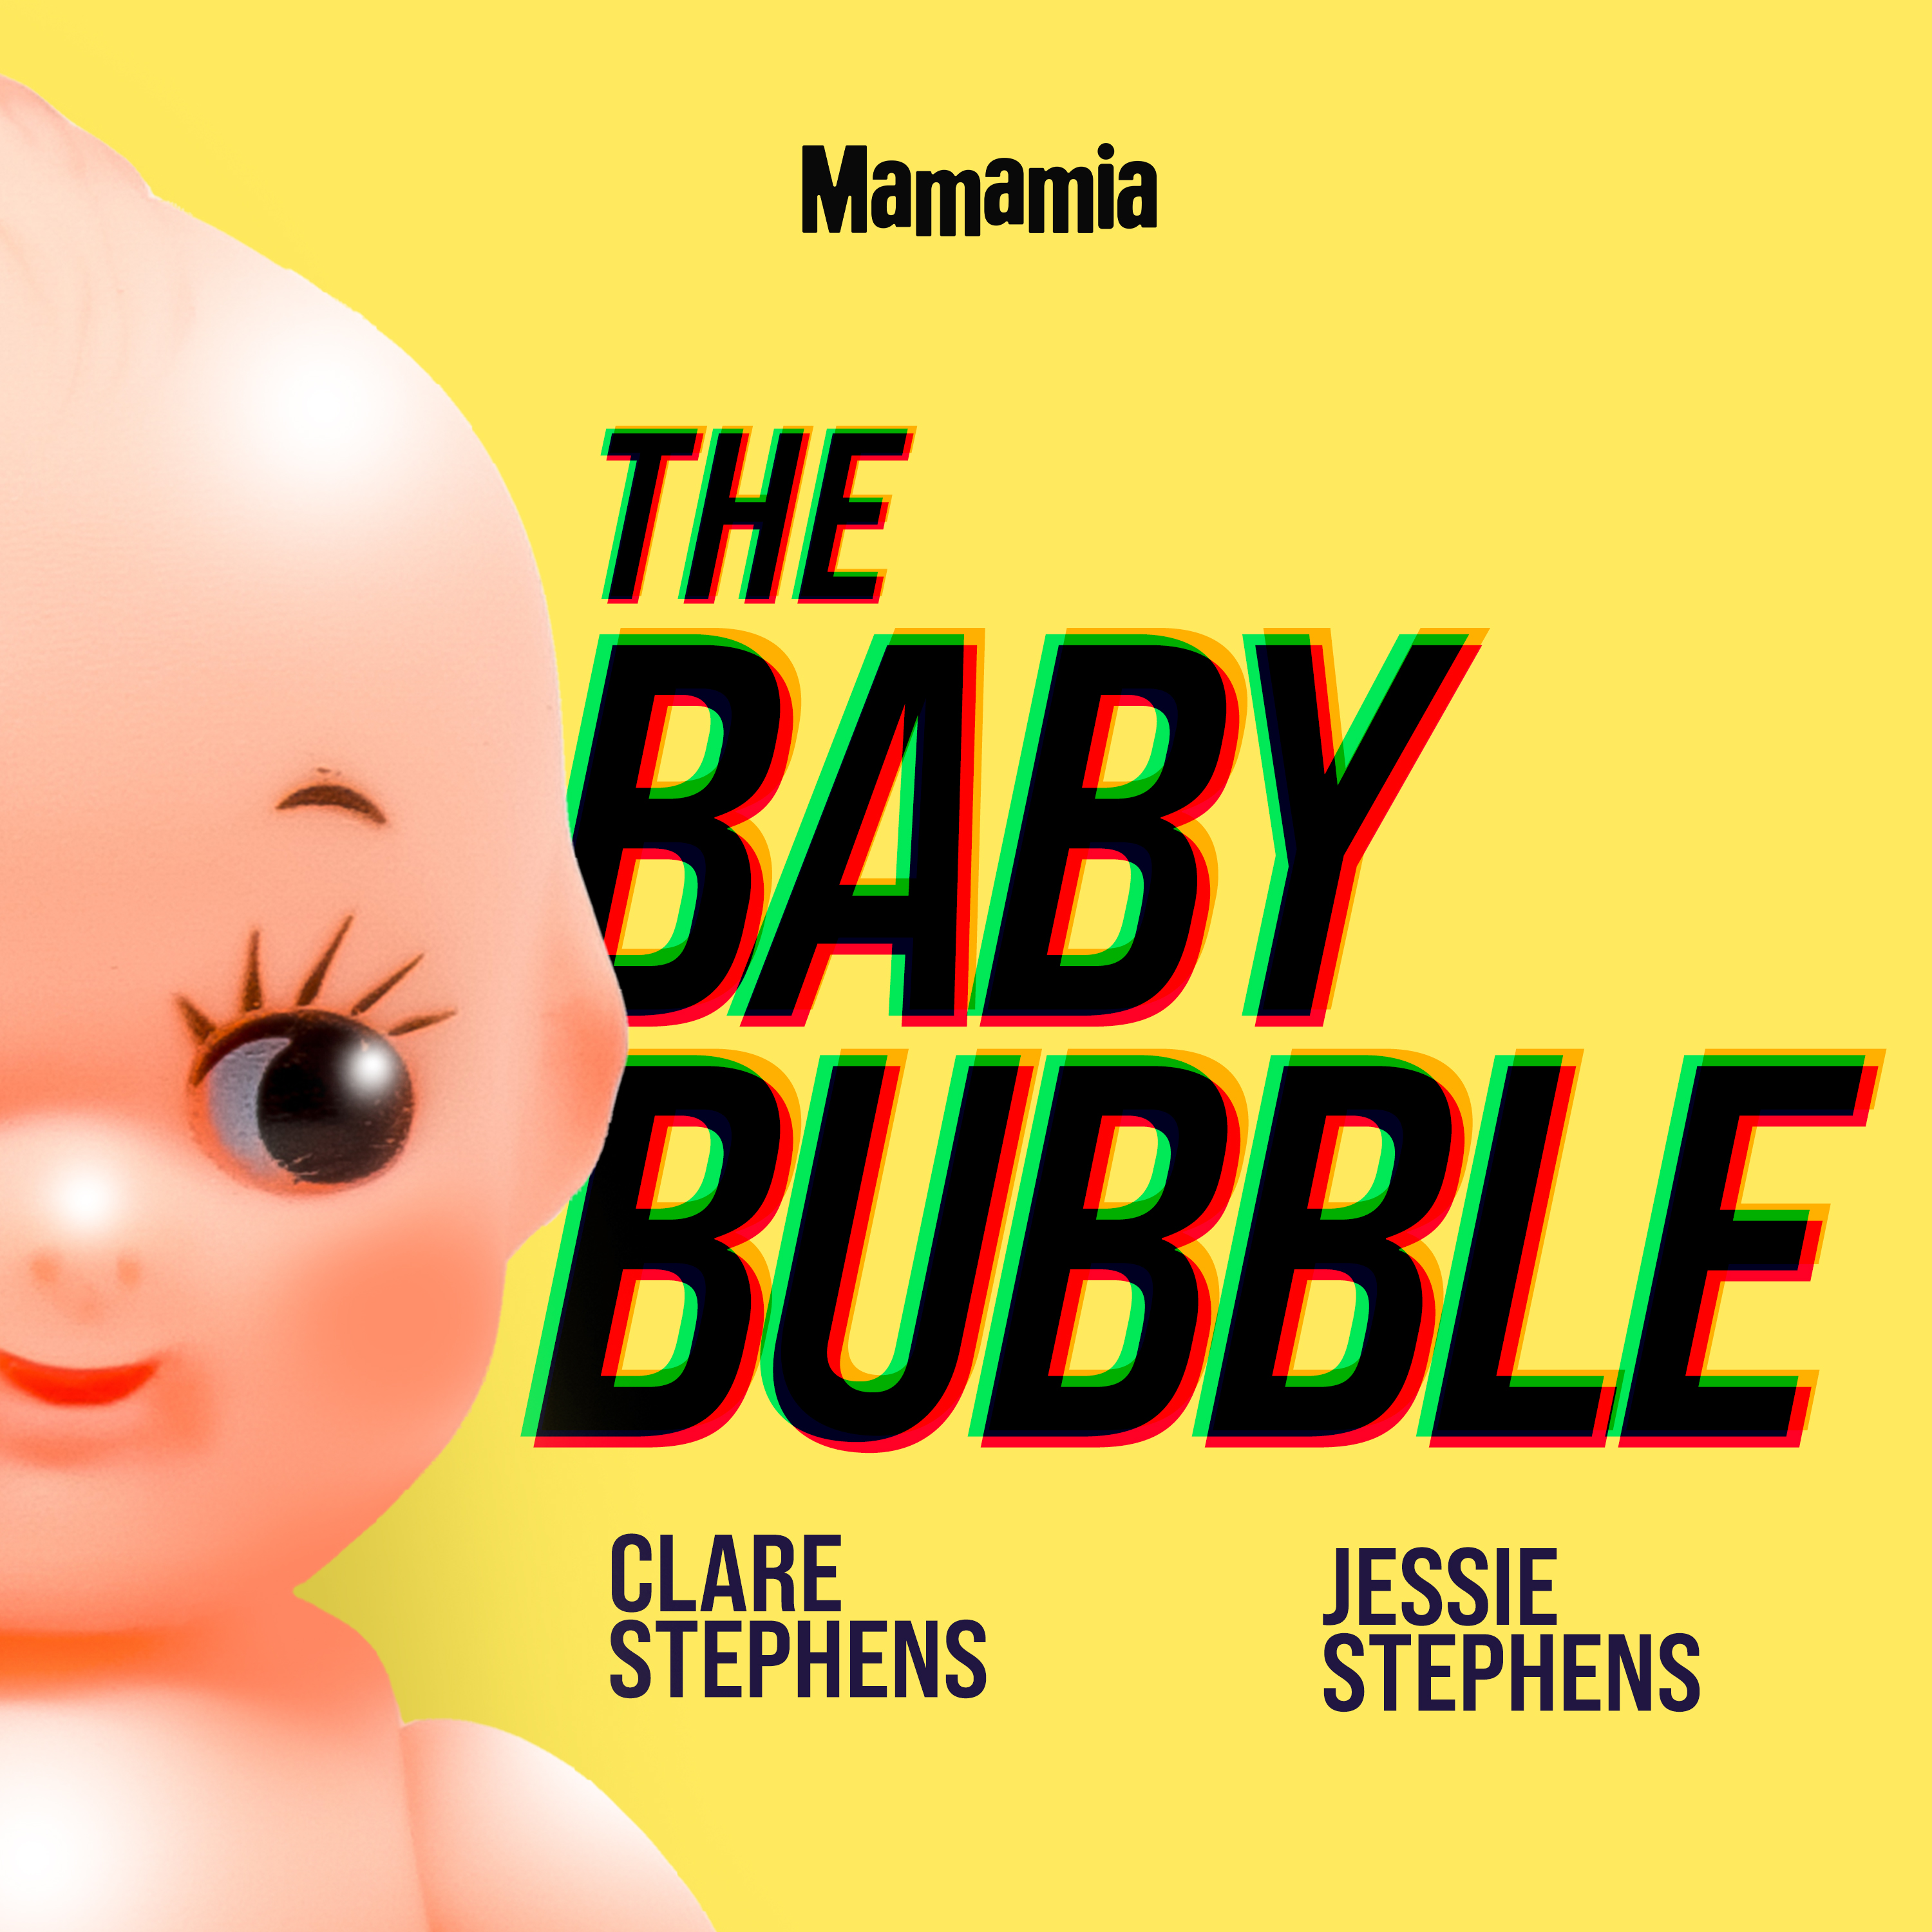 Introducing Our New Show: The Baby Bubble